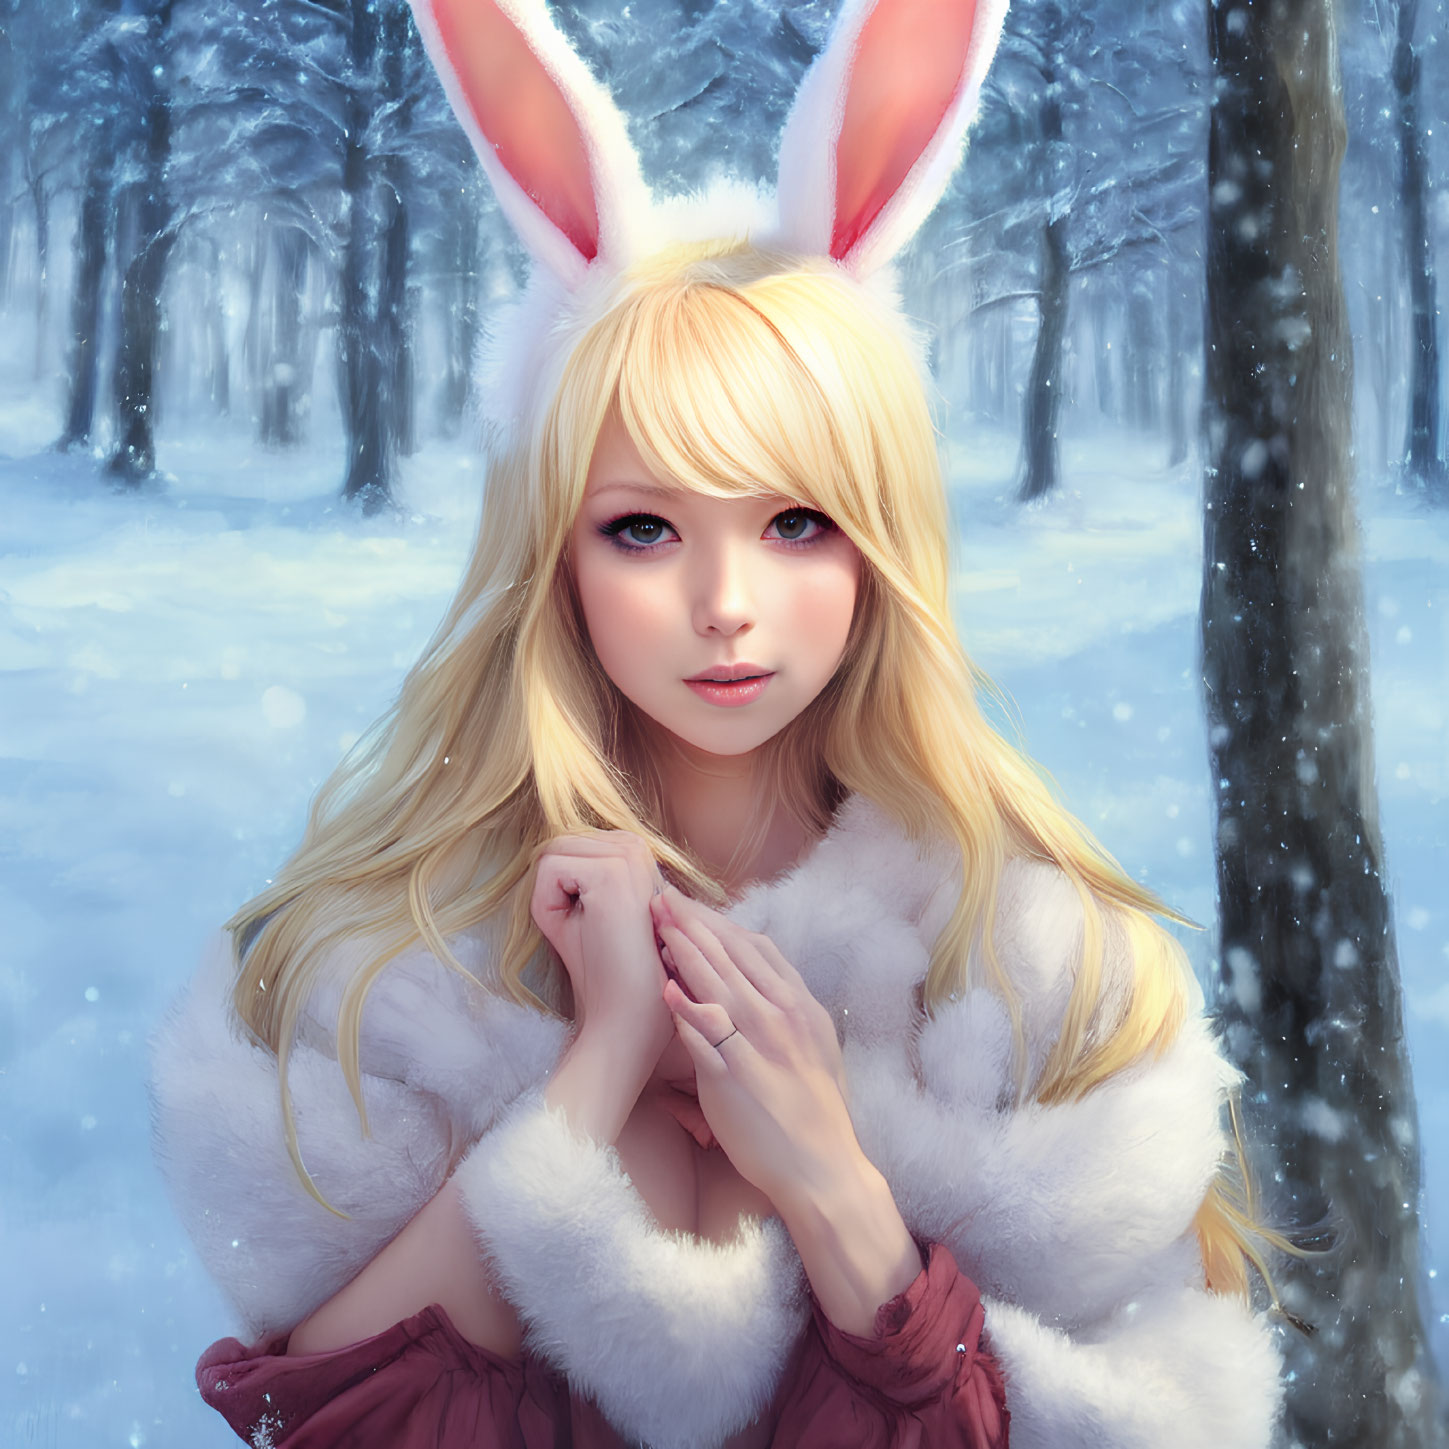 Blond person in bunny ears with white fur coat in snowy forest